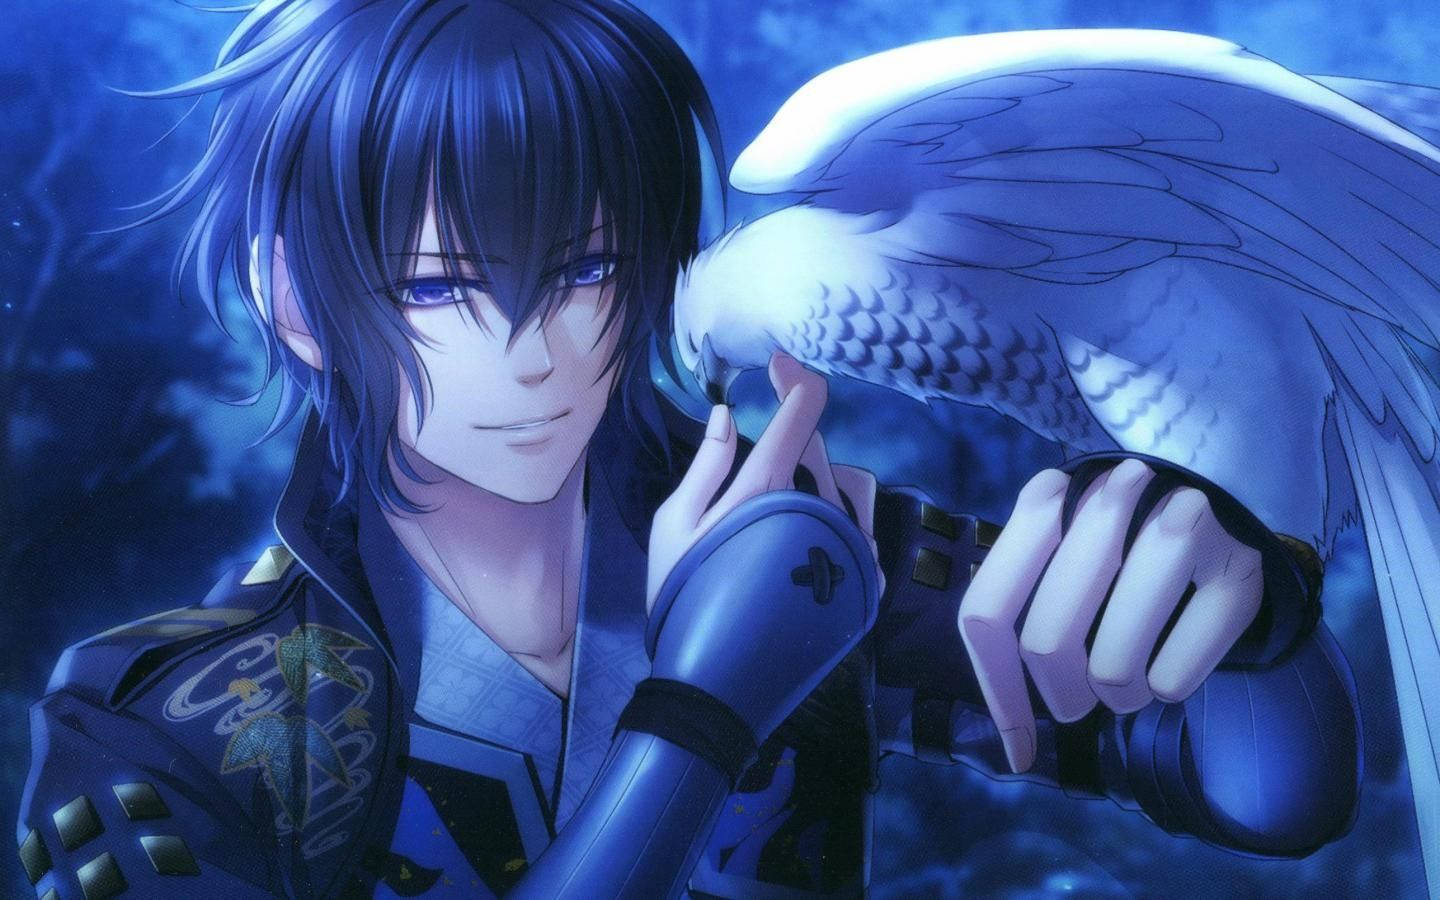 A Handsome Anime Boy Gazing At A Majestic Eagle Background